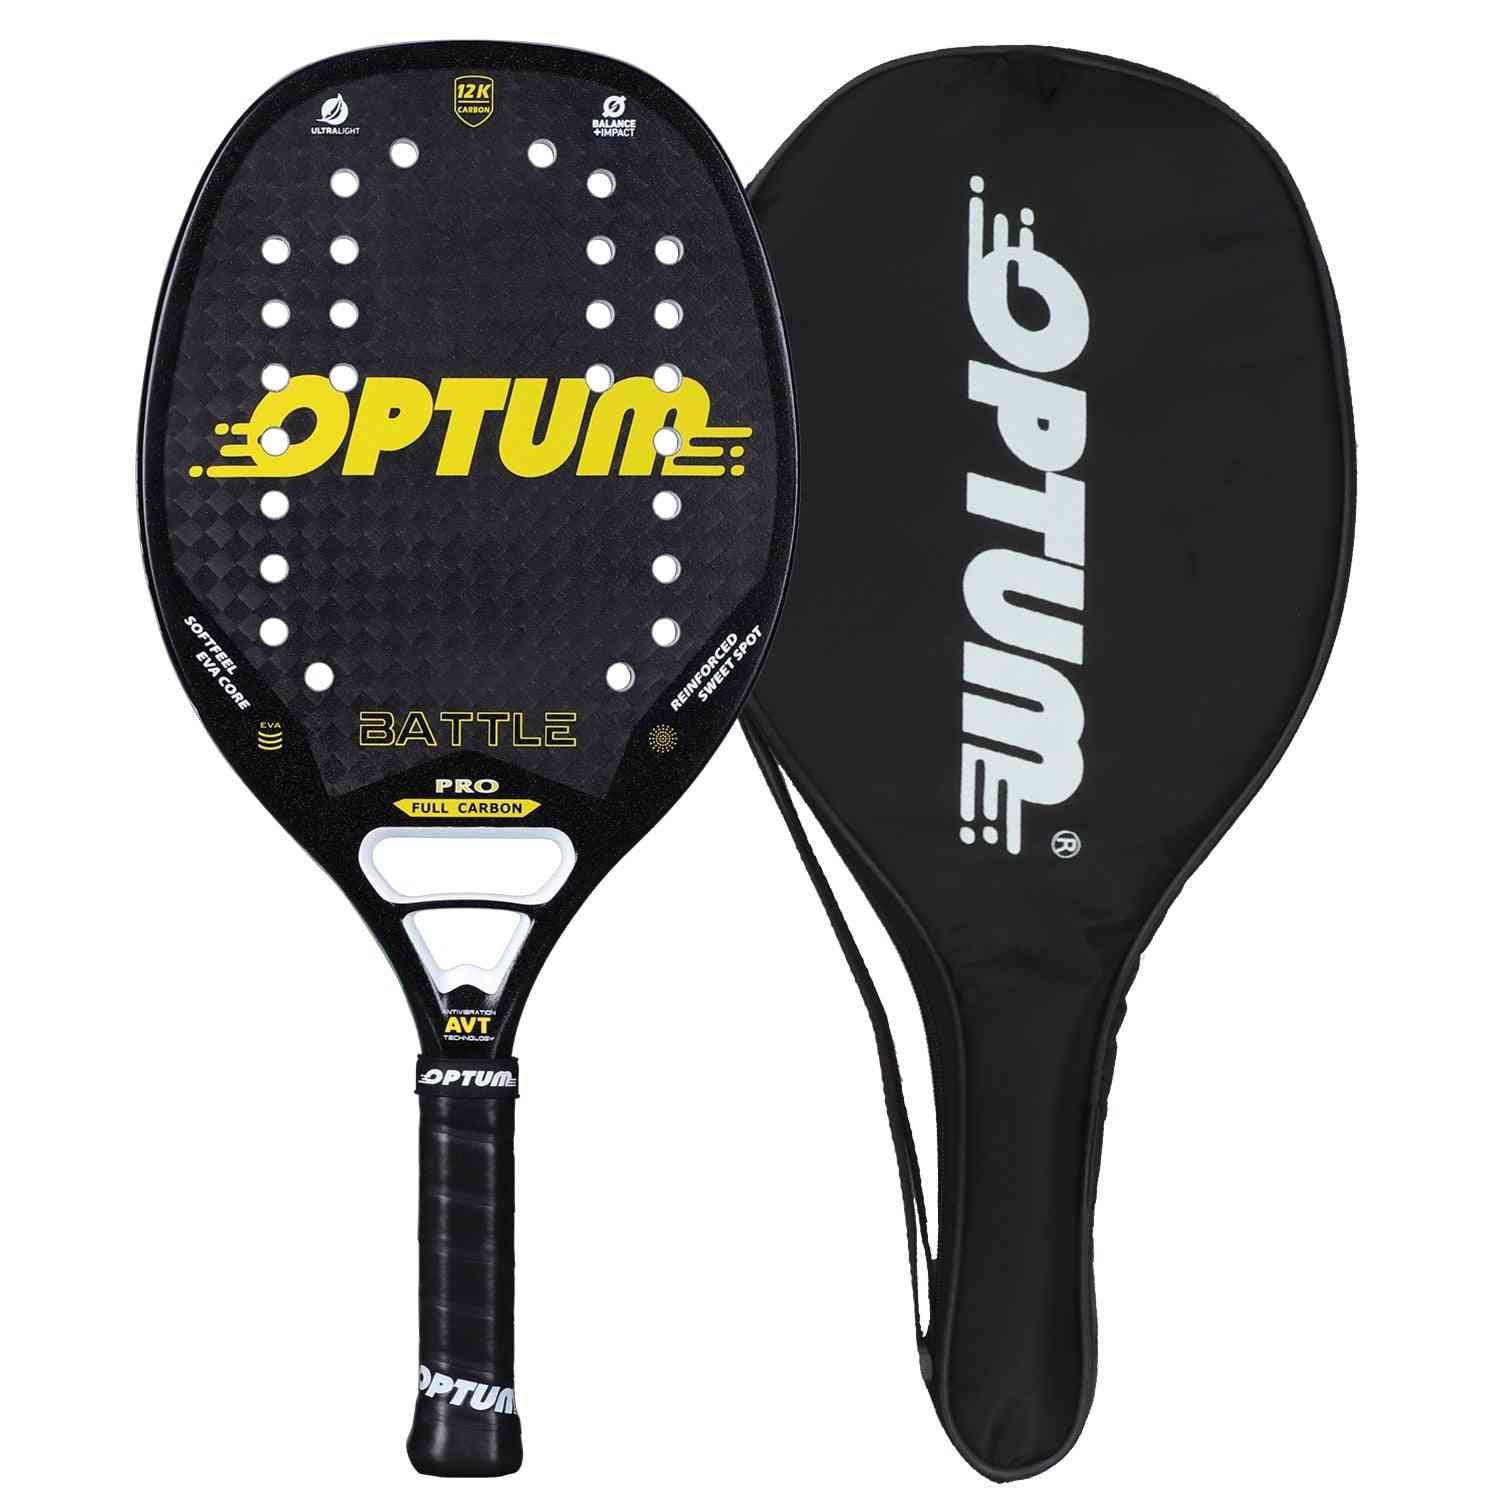 Tennis Racket With Cover Bag